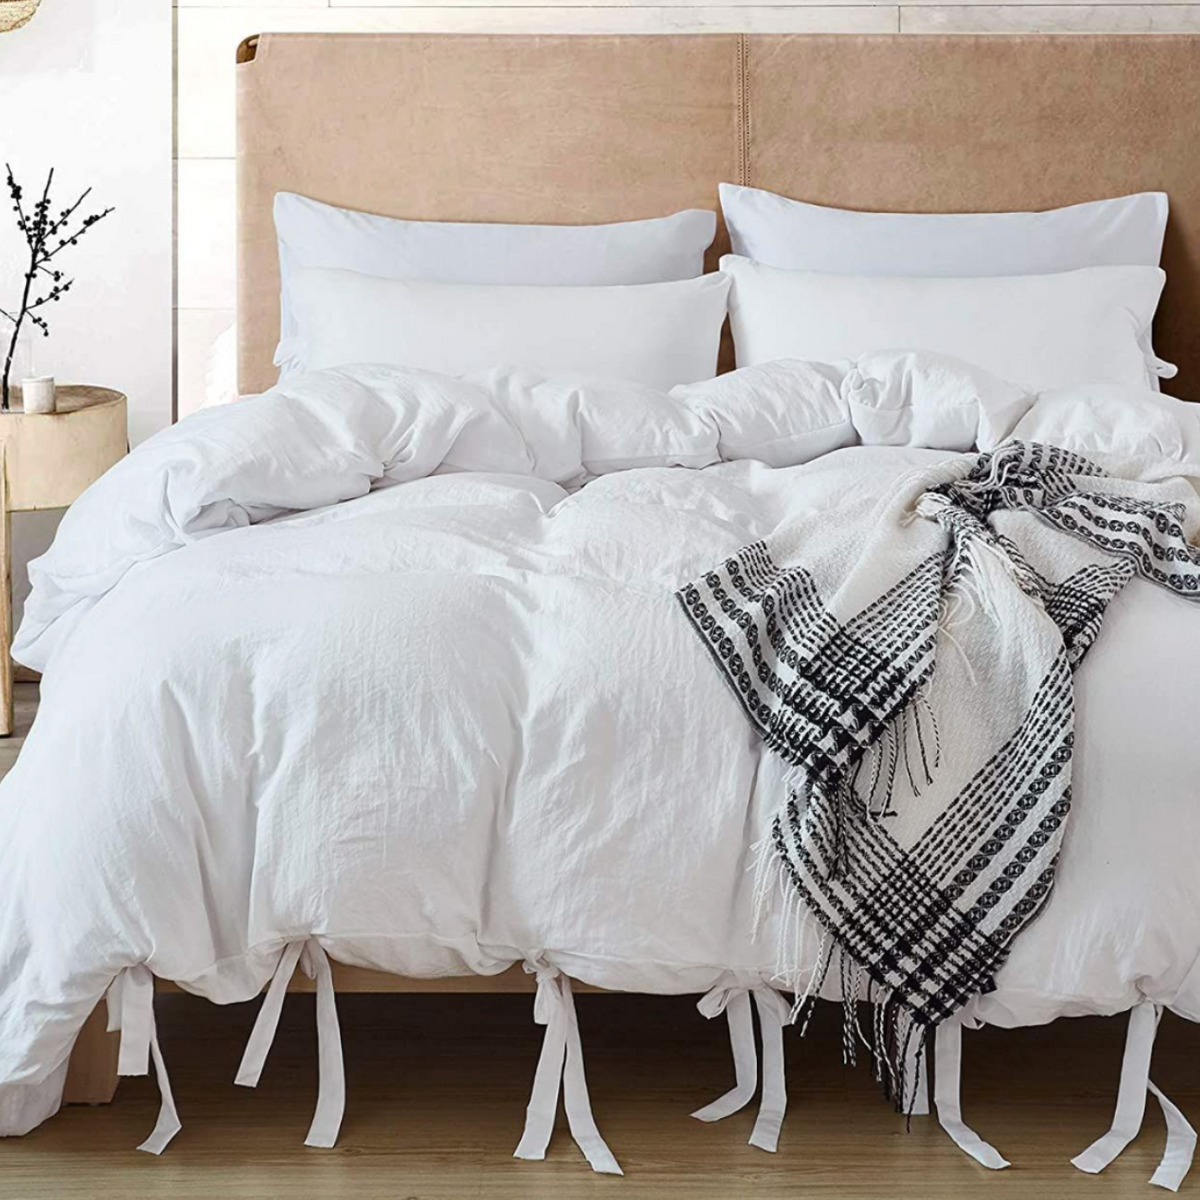 20 Best Duvet Covers 2022 The Strategist, How To Keep A Duvet In Place Without Ties